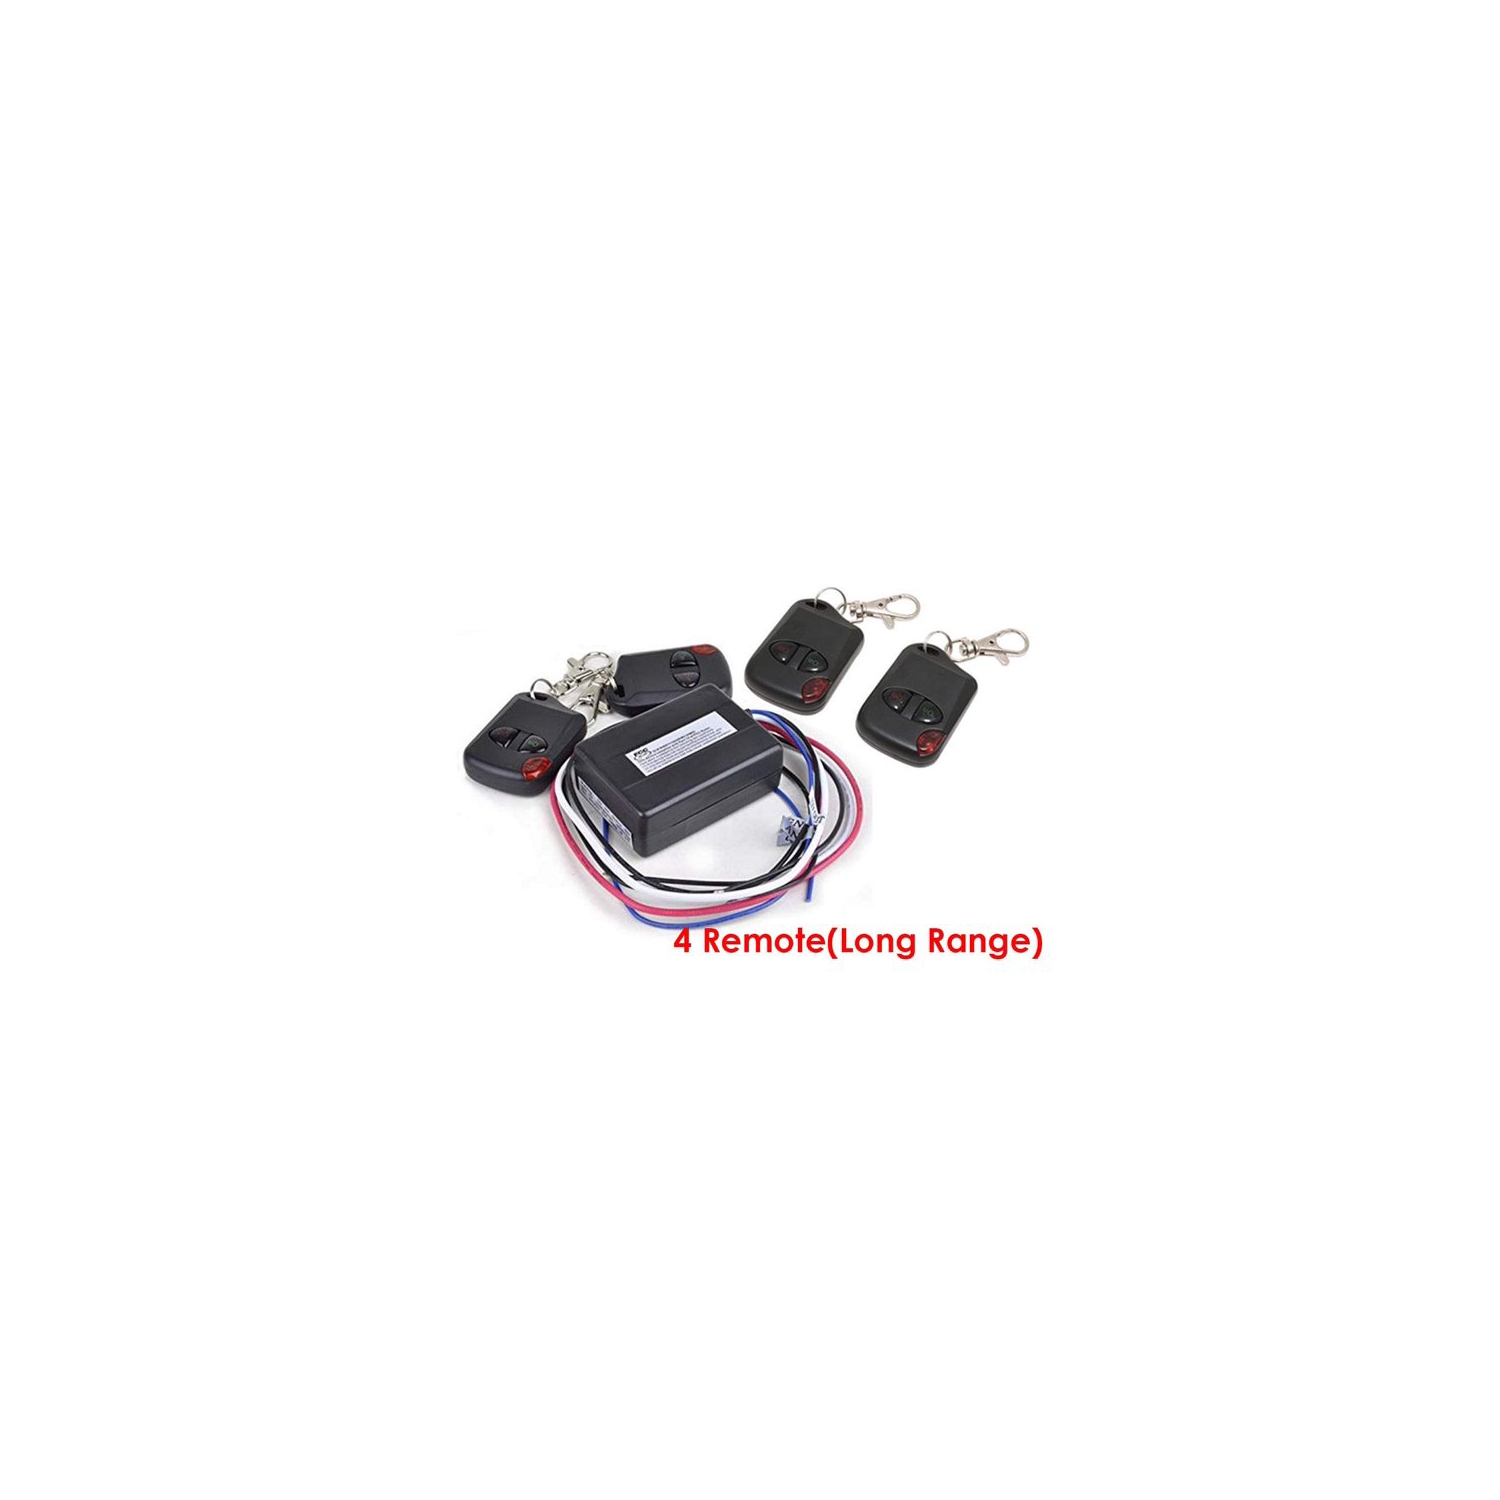 iMBAPrice Heavy Duty RM02-4R (4 Remotes Control) 12V, 15 Amps Boat and Car Universal Remote Control Kit